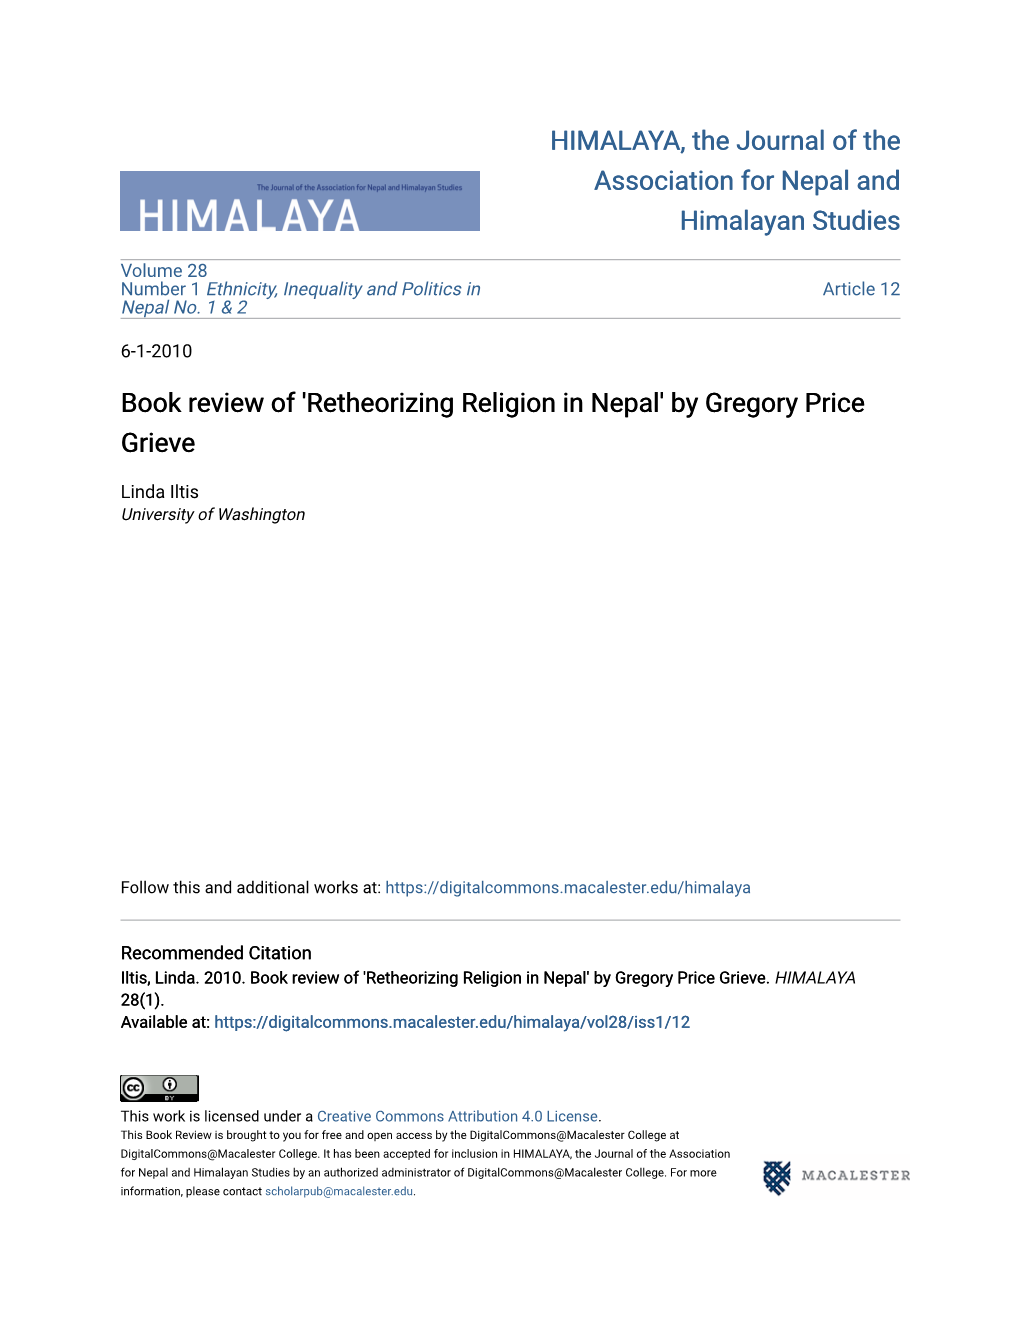 Retheorizing Religion in Nepal' by Gregory Price Grieve